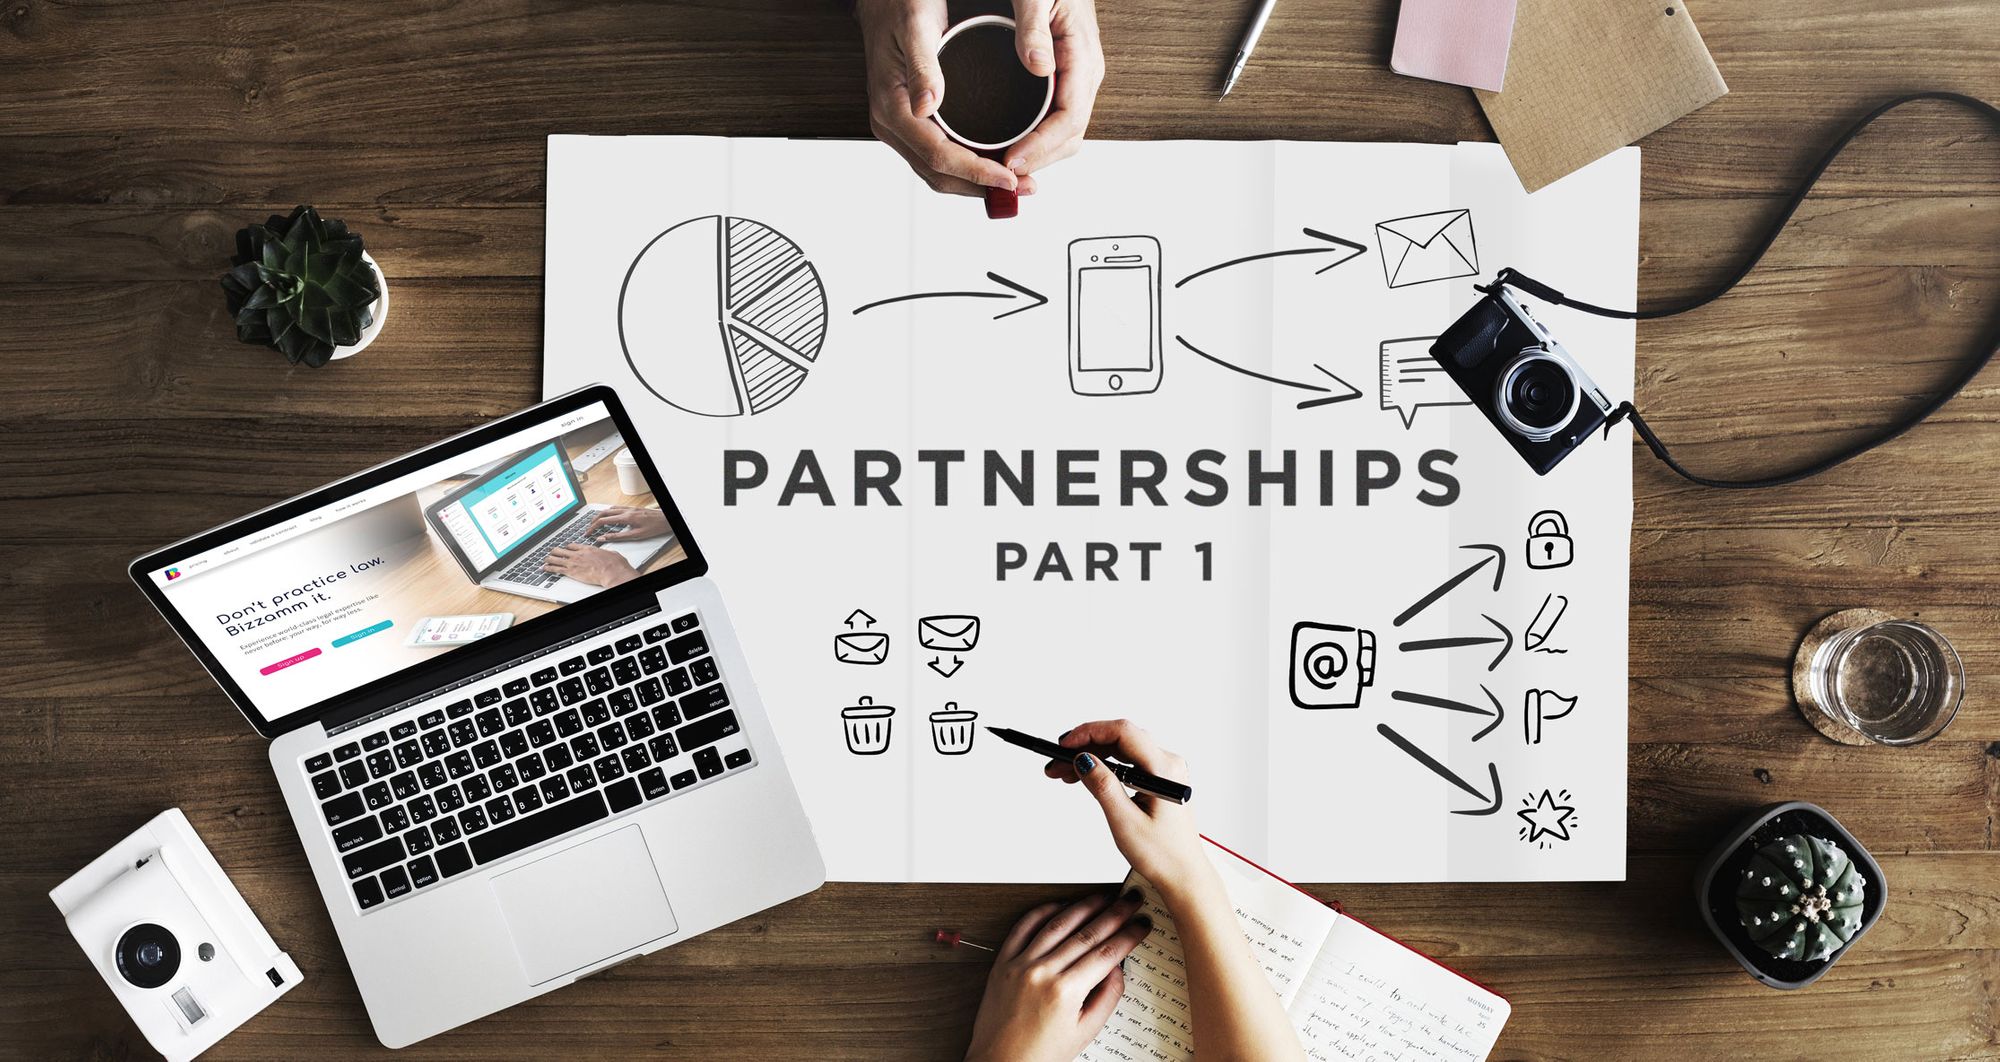 How to Secure Your Partnership with High-End Clients?